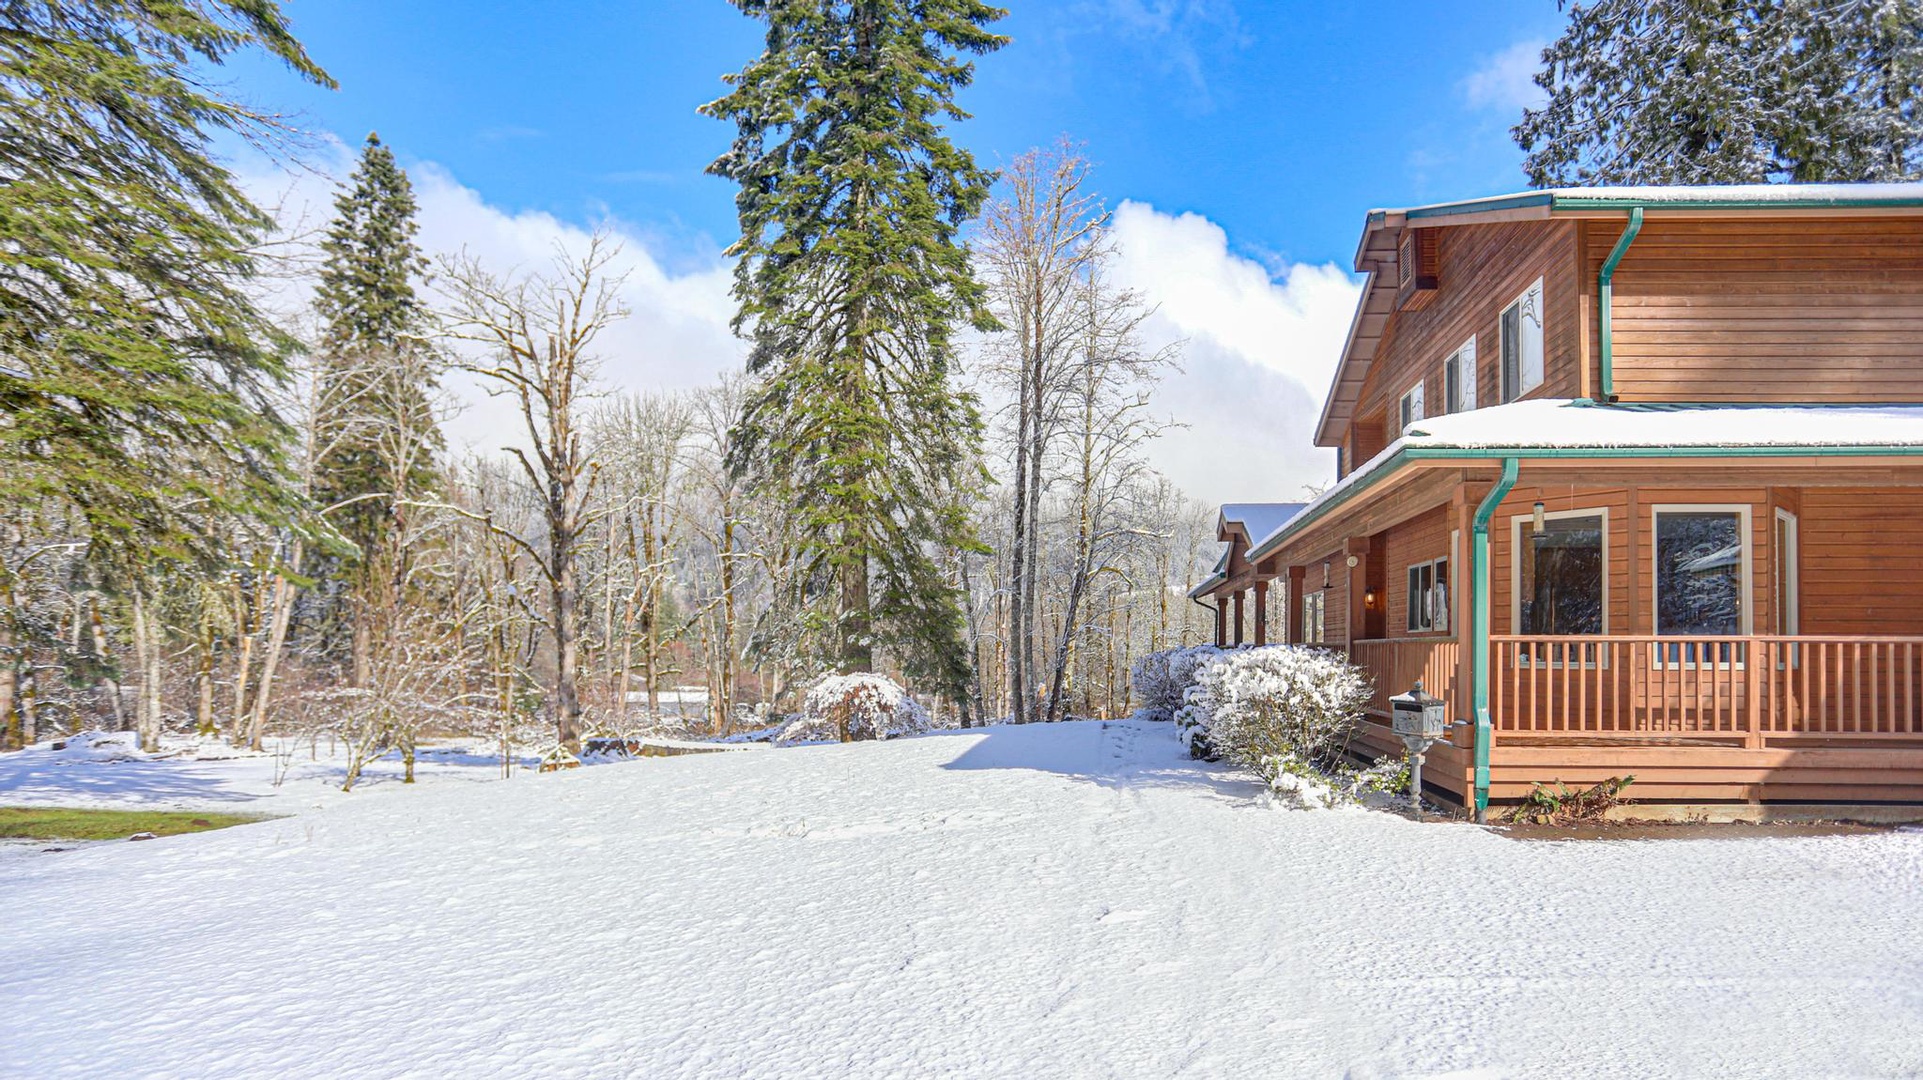 Sandy Vacation Rentals, Iron Mountain - Lots of snow this Winter!